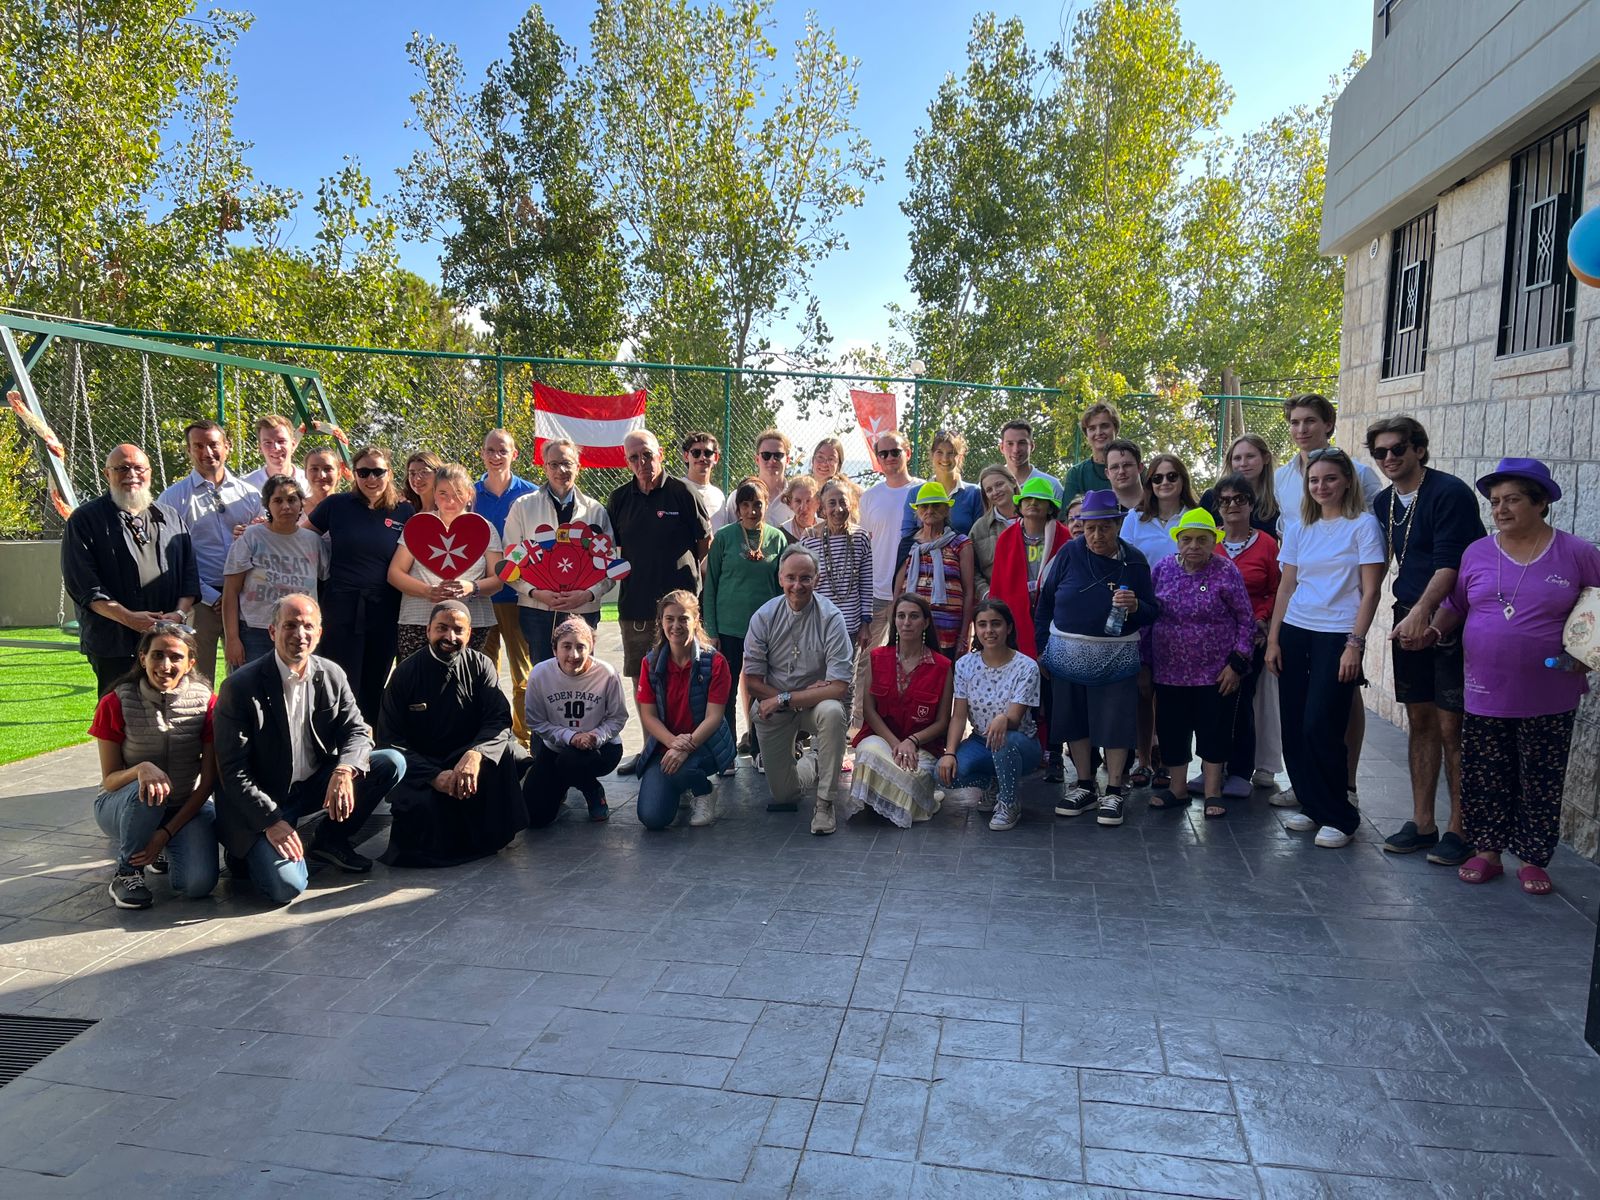 The Grand Hospitaller in Lebanon to visit some of the most important projects run by the Order of Malta in the Country